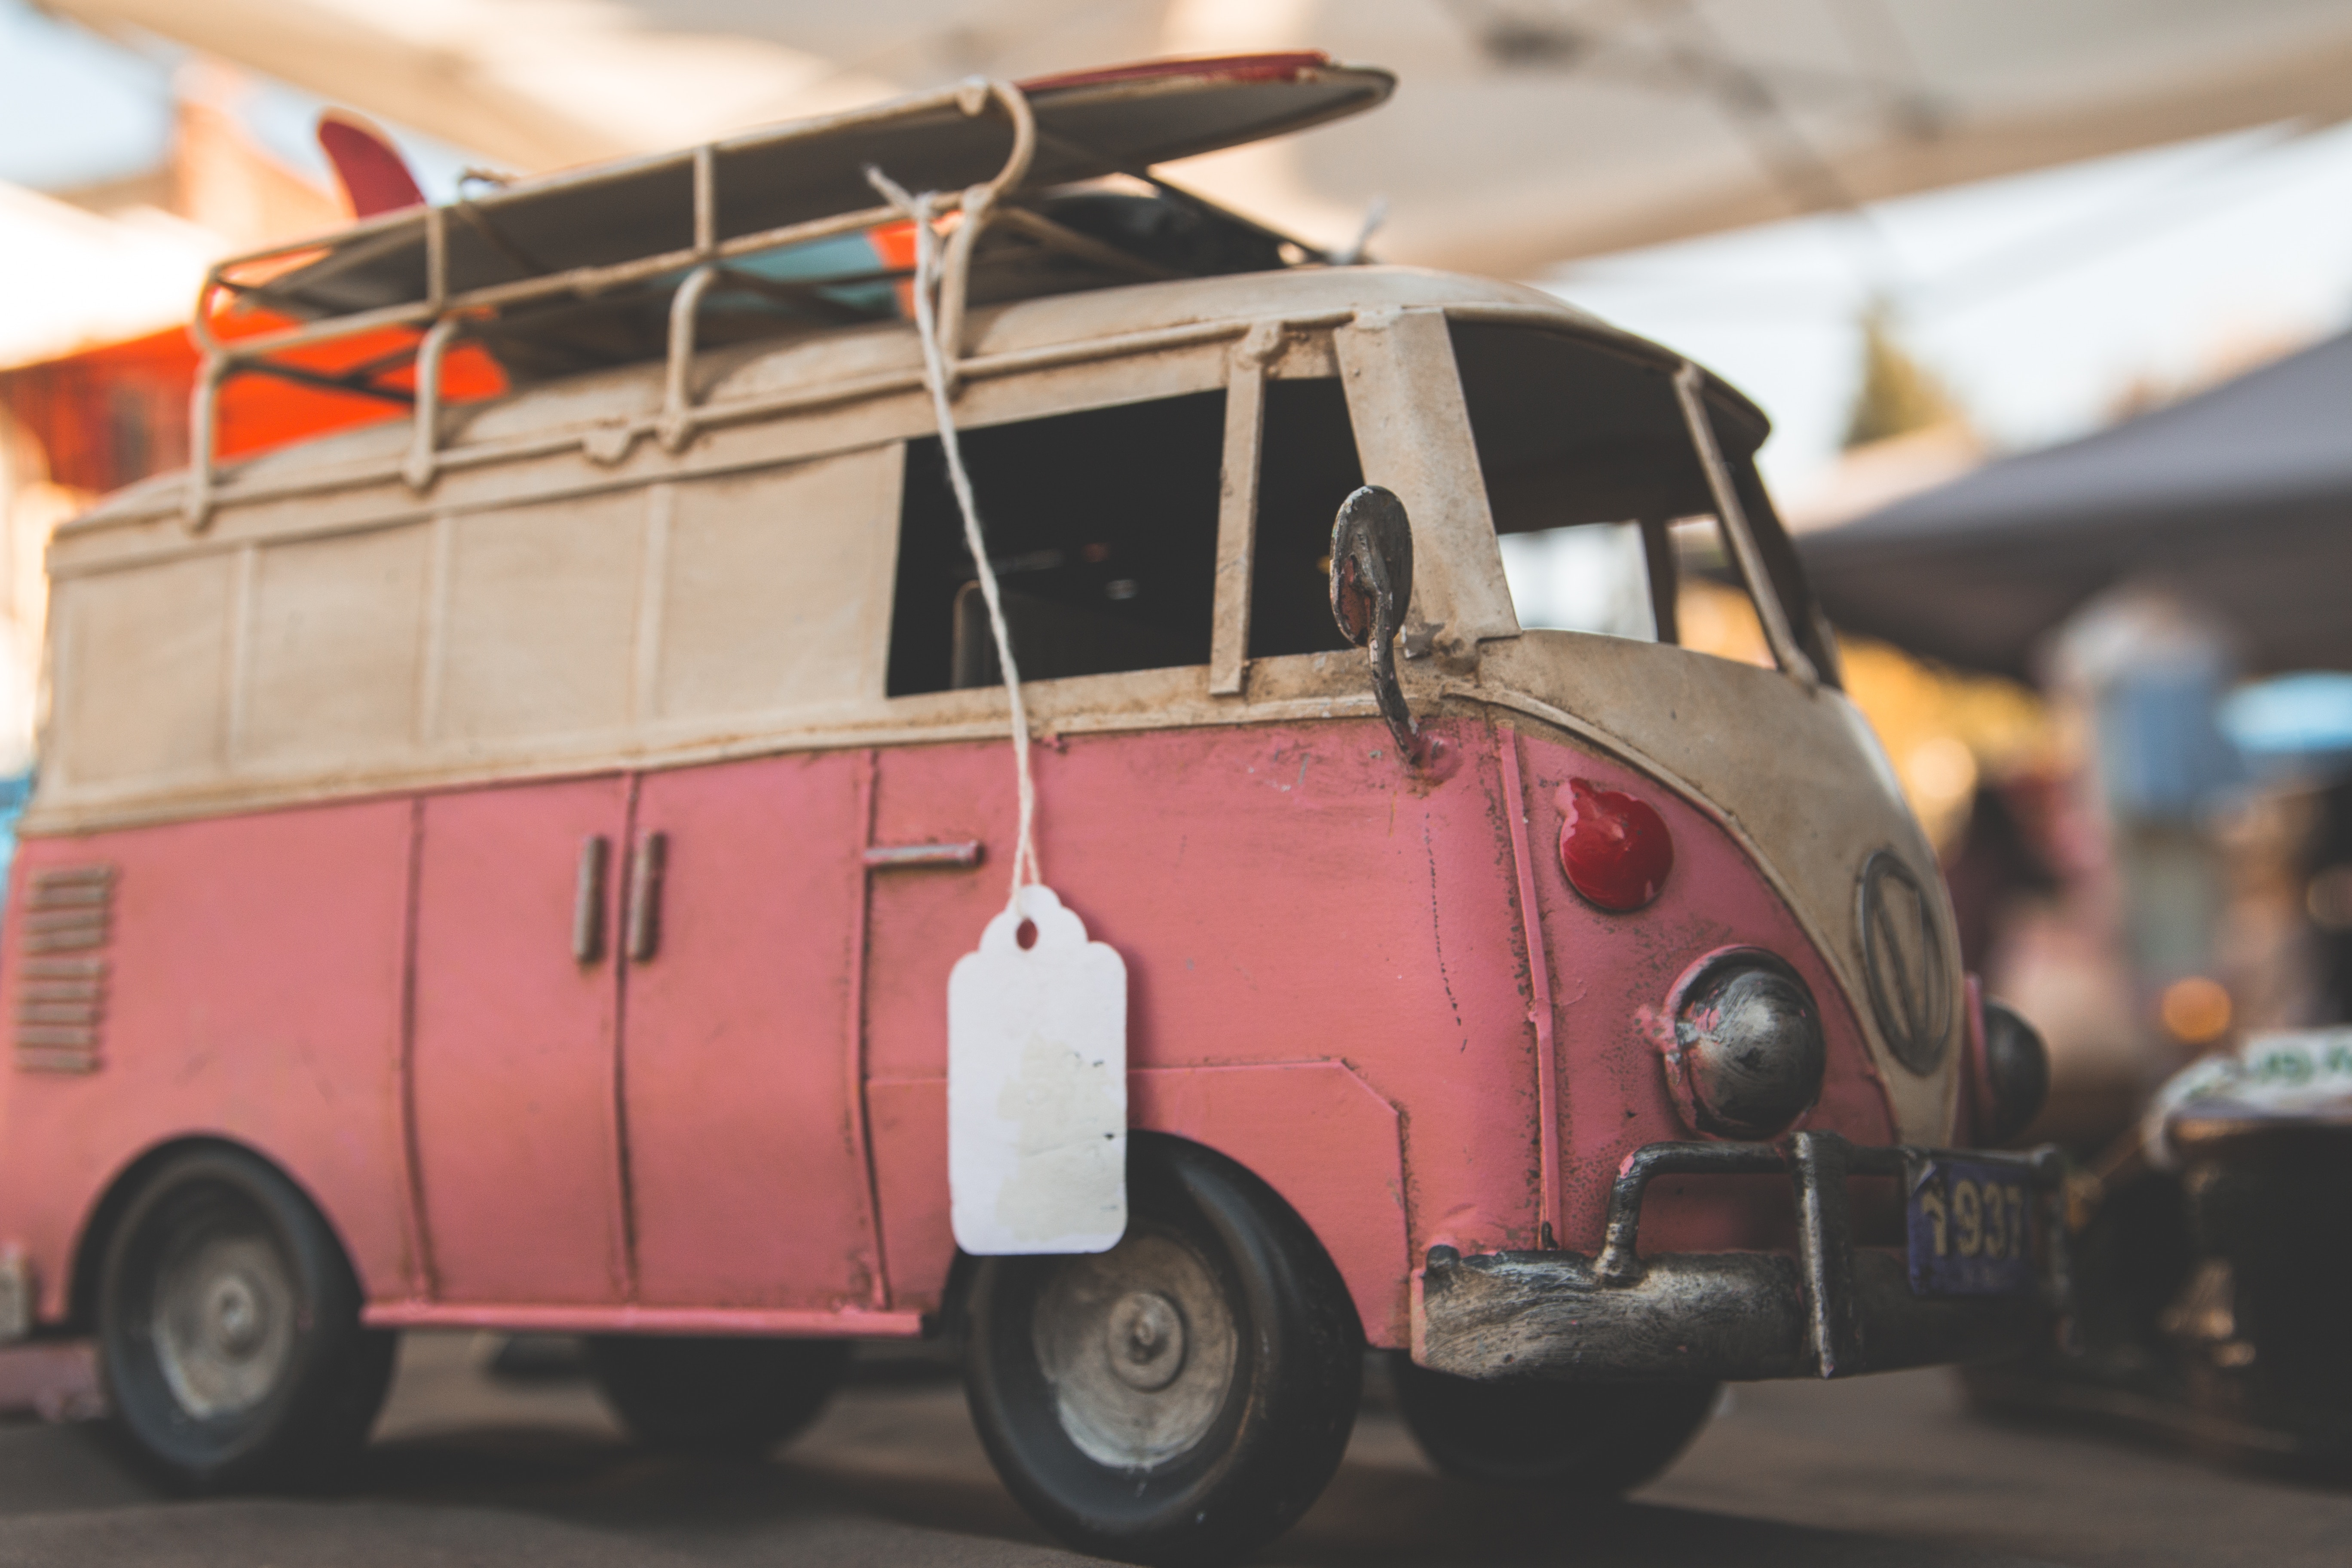 8 Tips to Get Organized for Your Summer Garage Sale